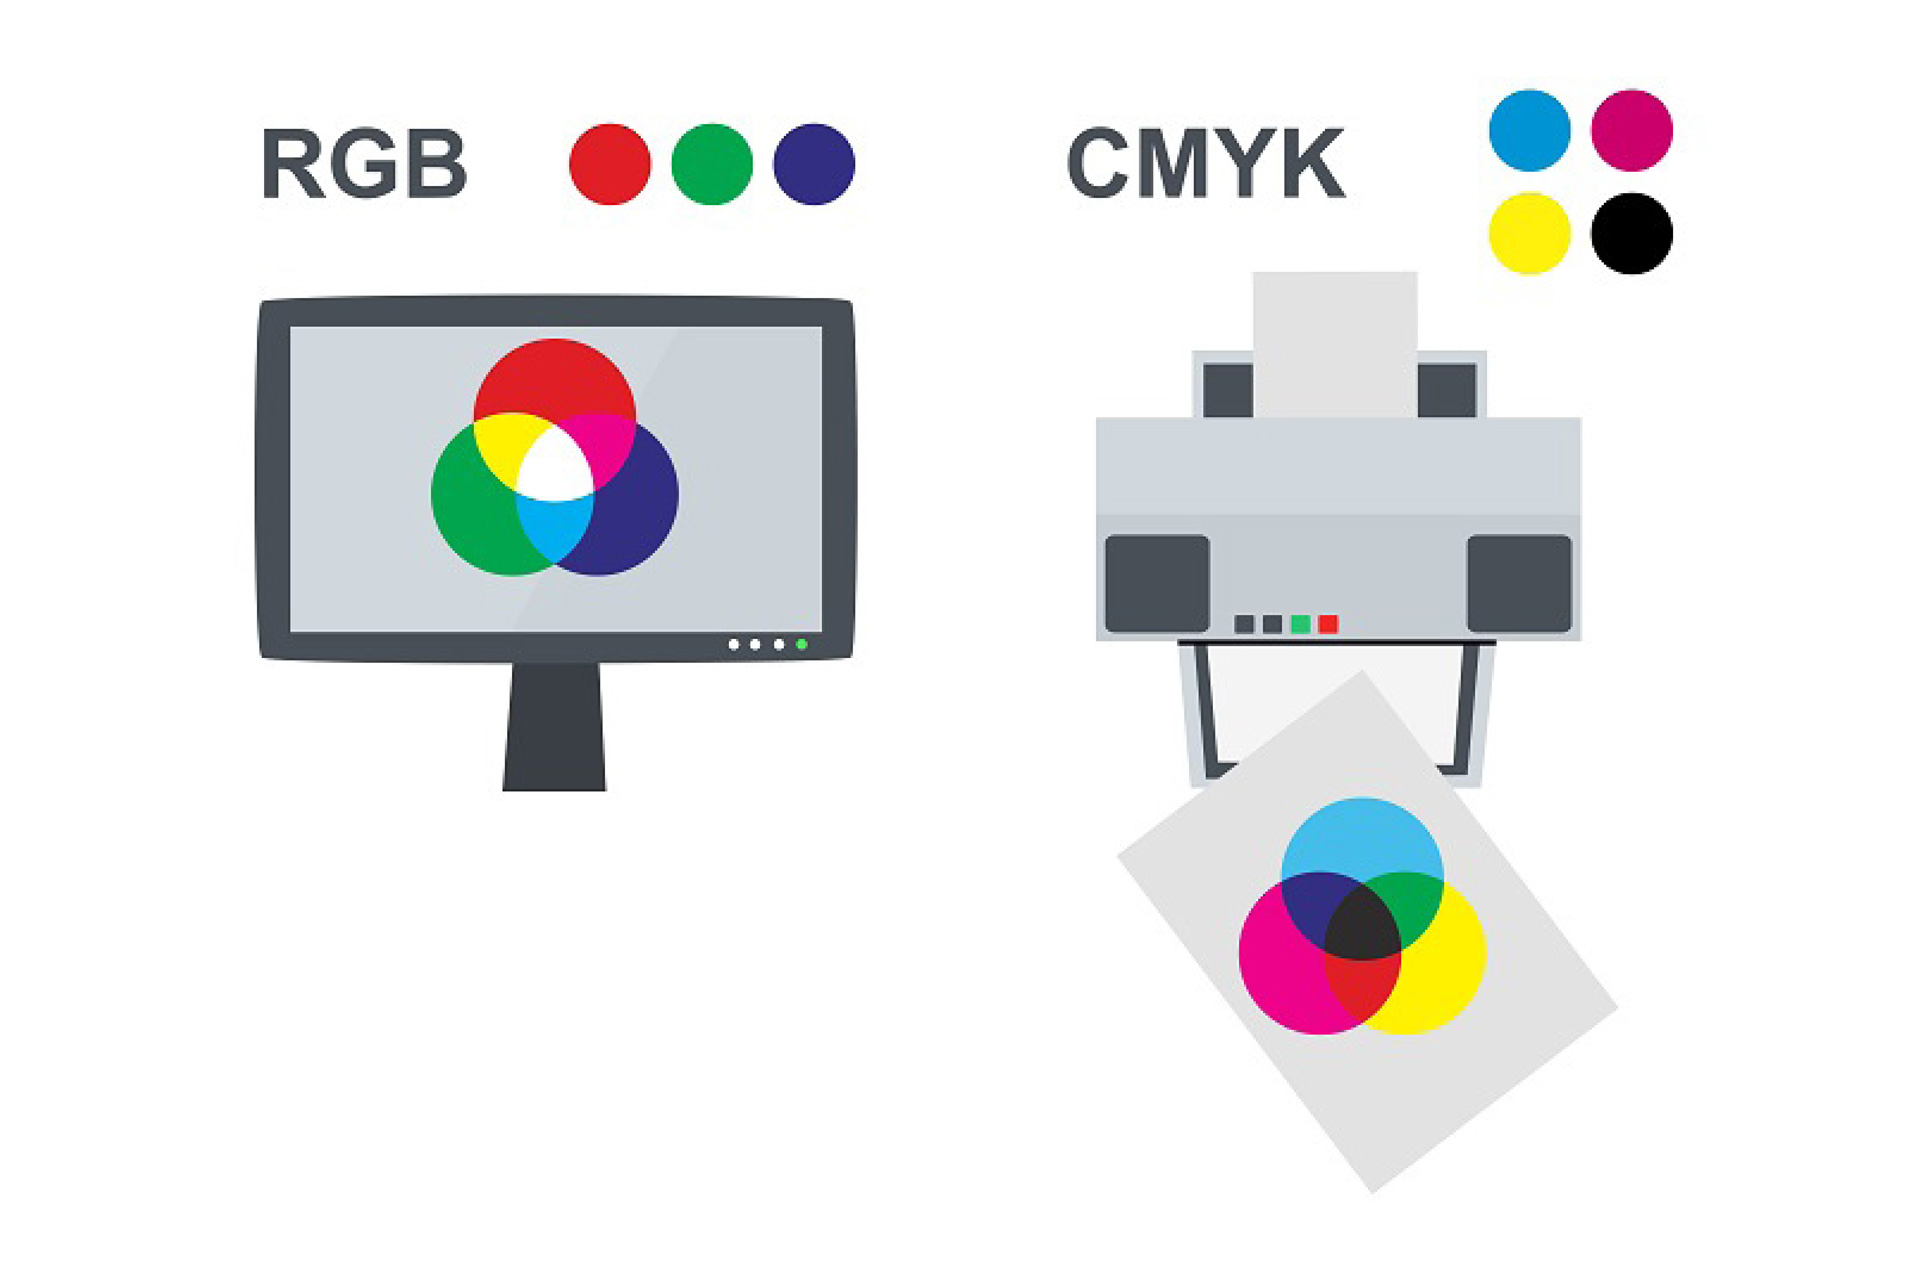 Colour comparison between RGB and CMYK